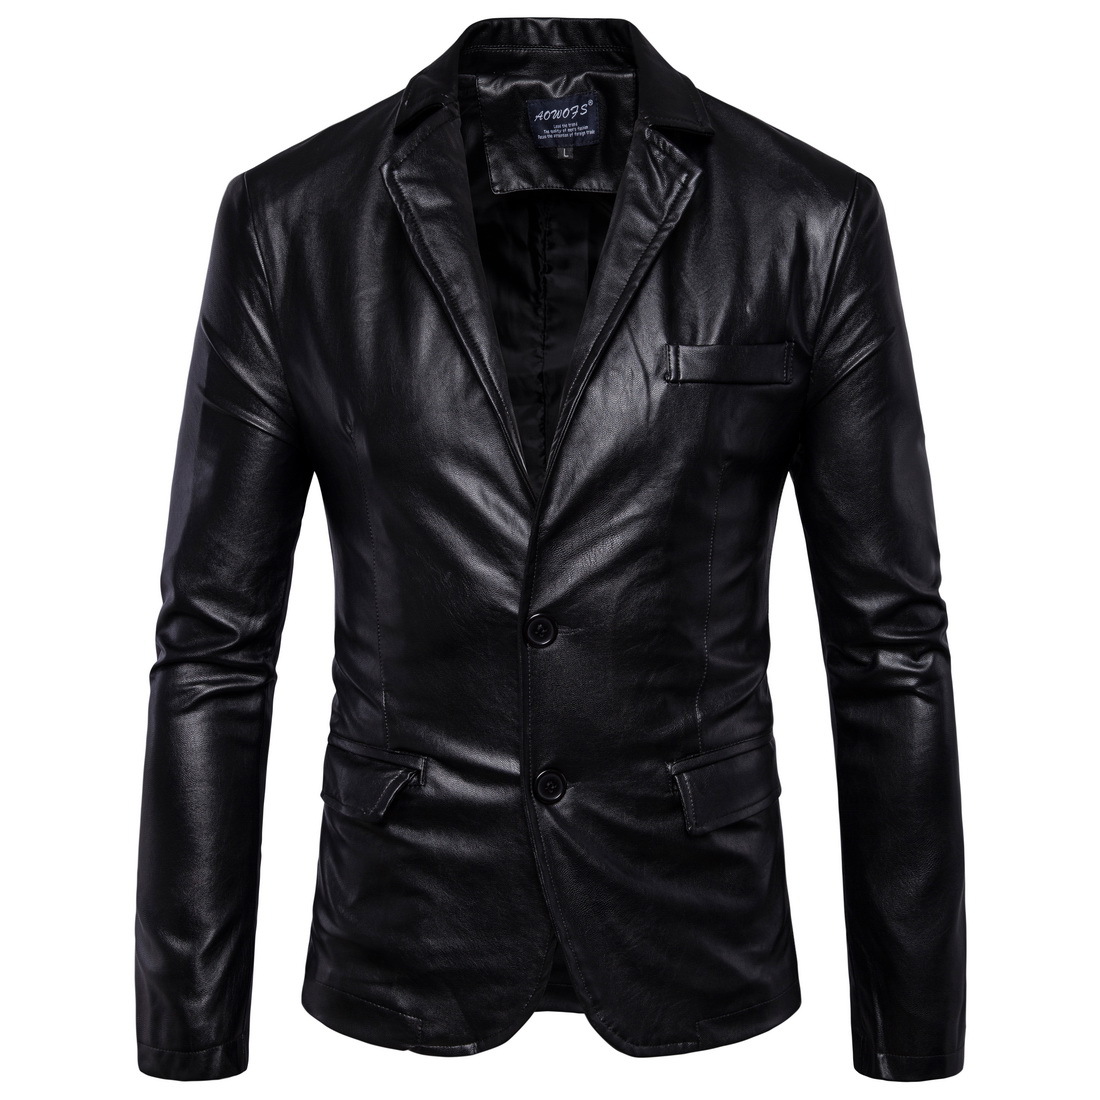 Men's Outerwear Coats Leather Leather Autumn New Men's Flip Collar Slim Fit Leather Coat Large Men's Leather Suit European and American Style PU Leather Coat